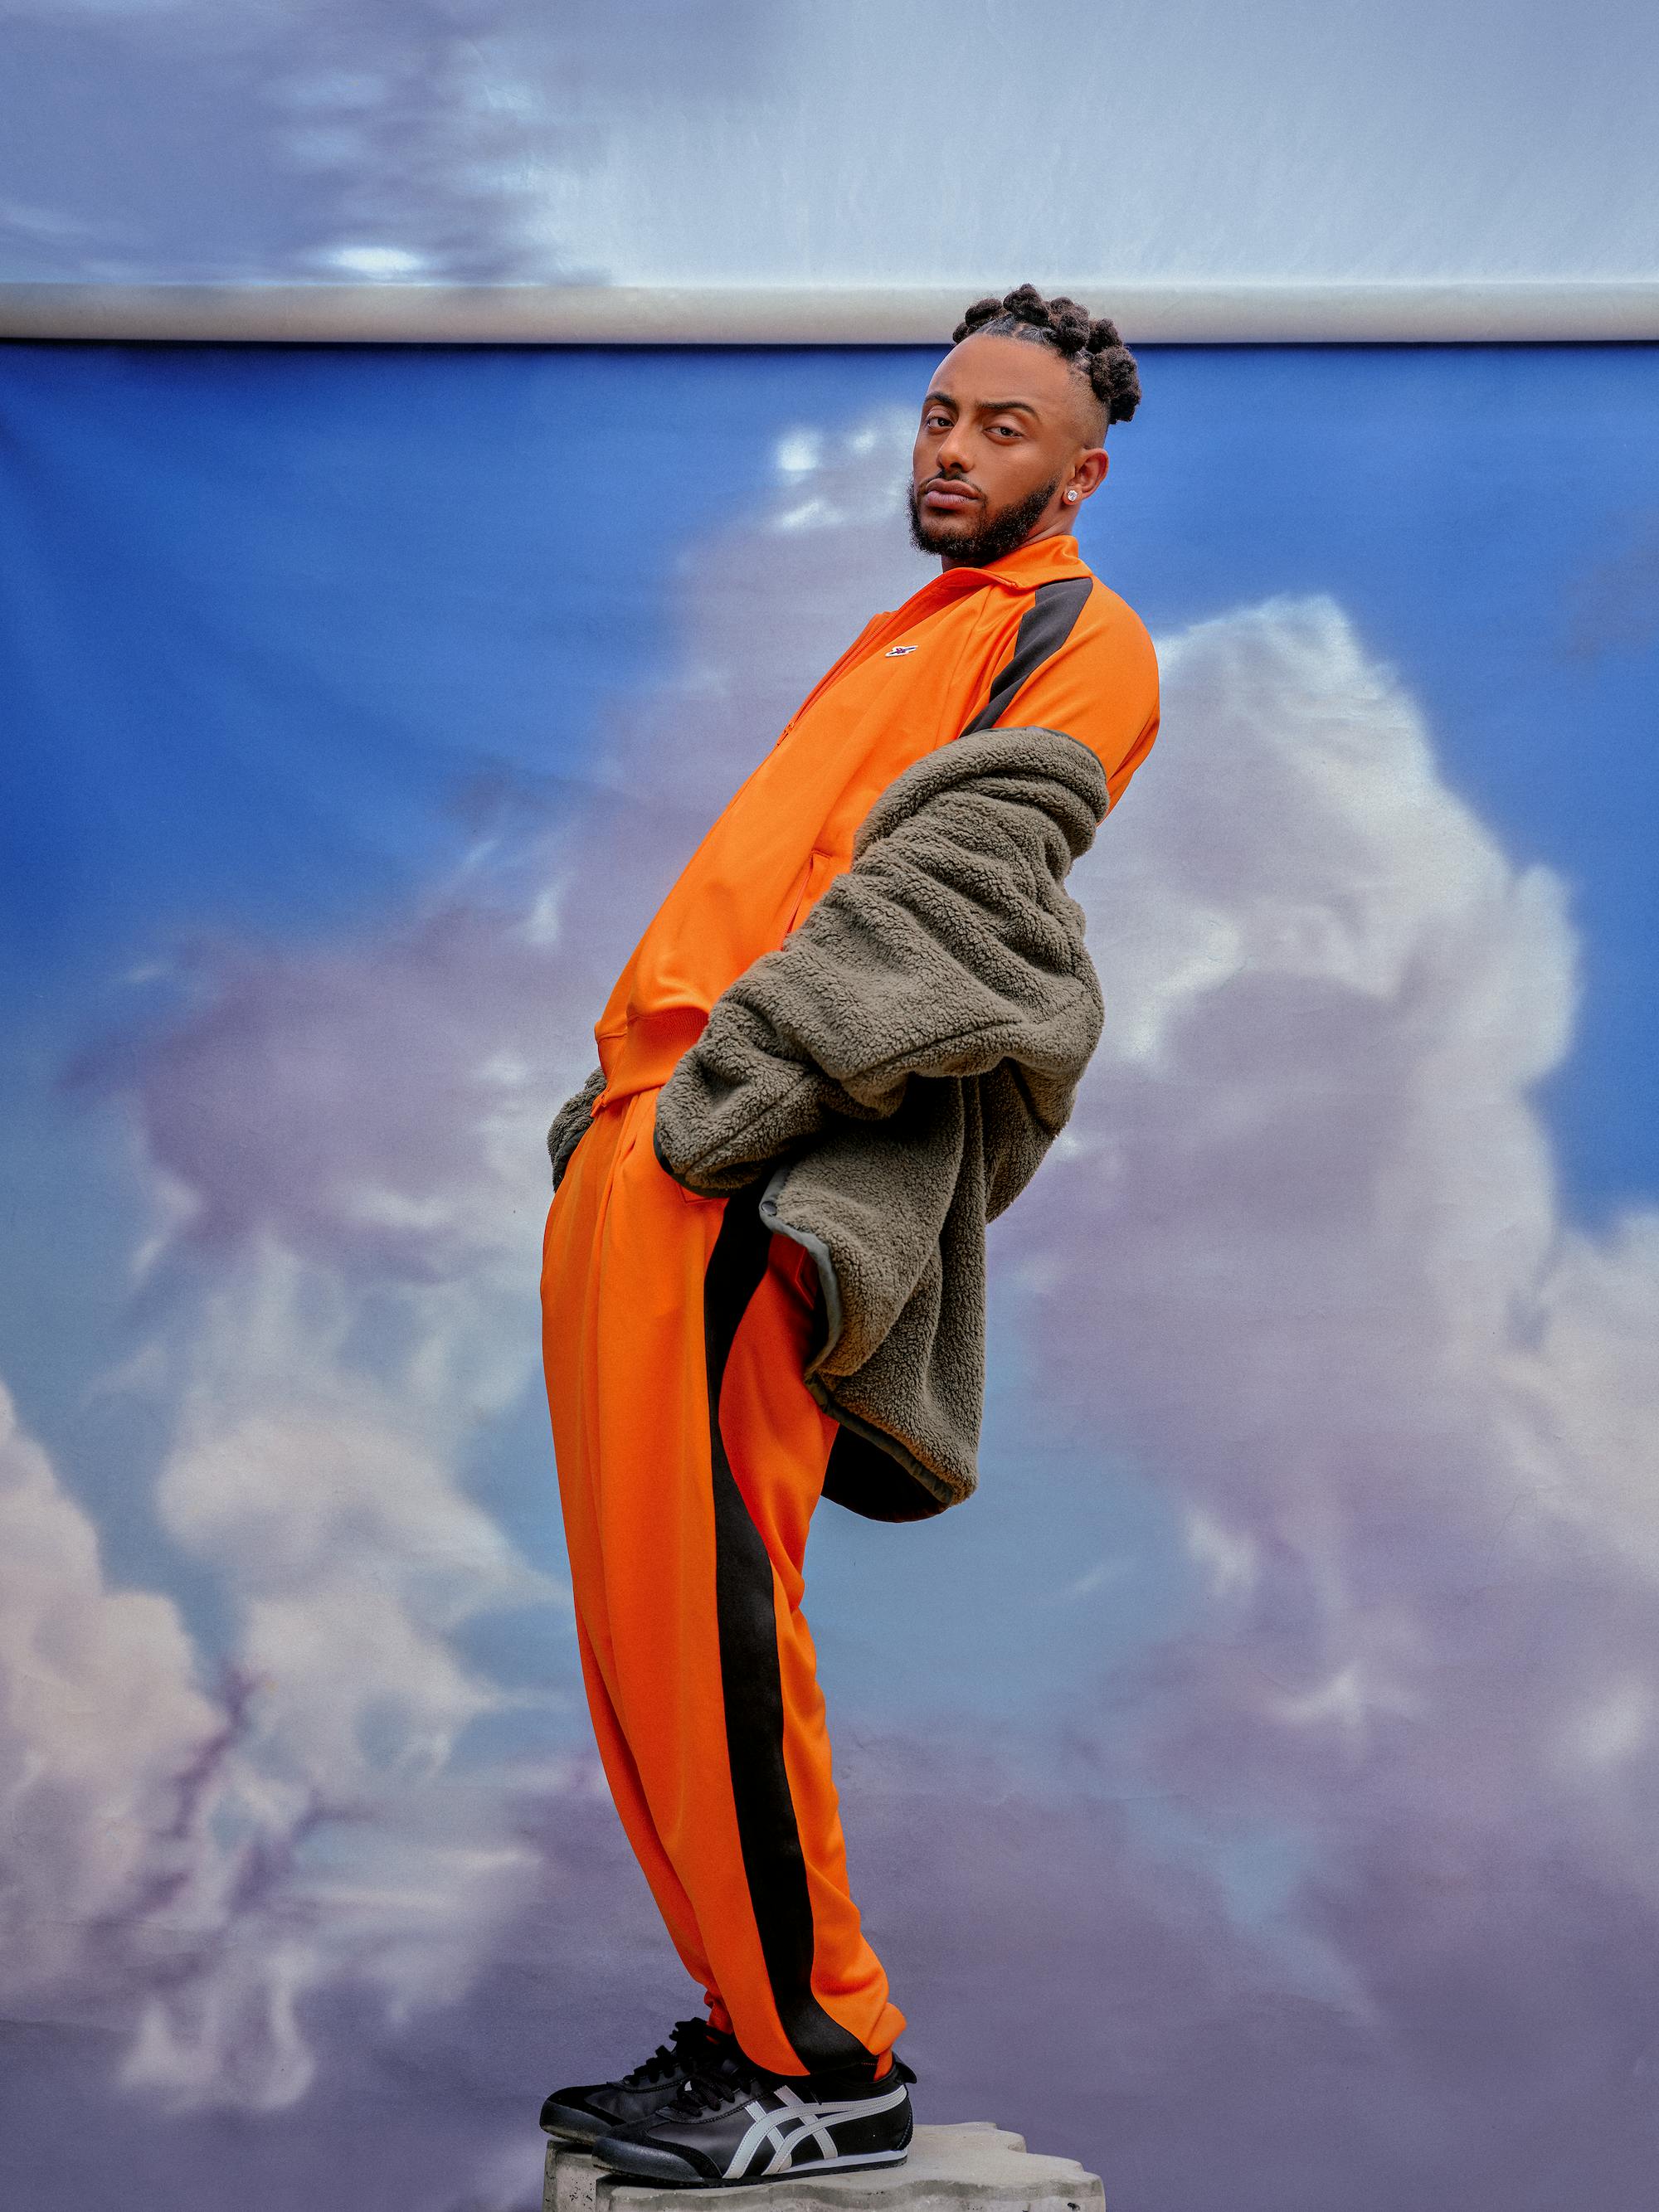 Amine's New Album 'Limbo' Is Going to Be Groovy as Hell